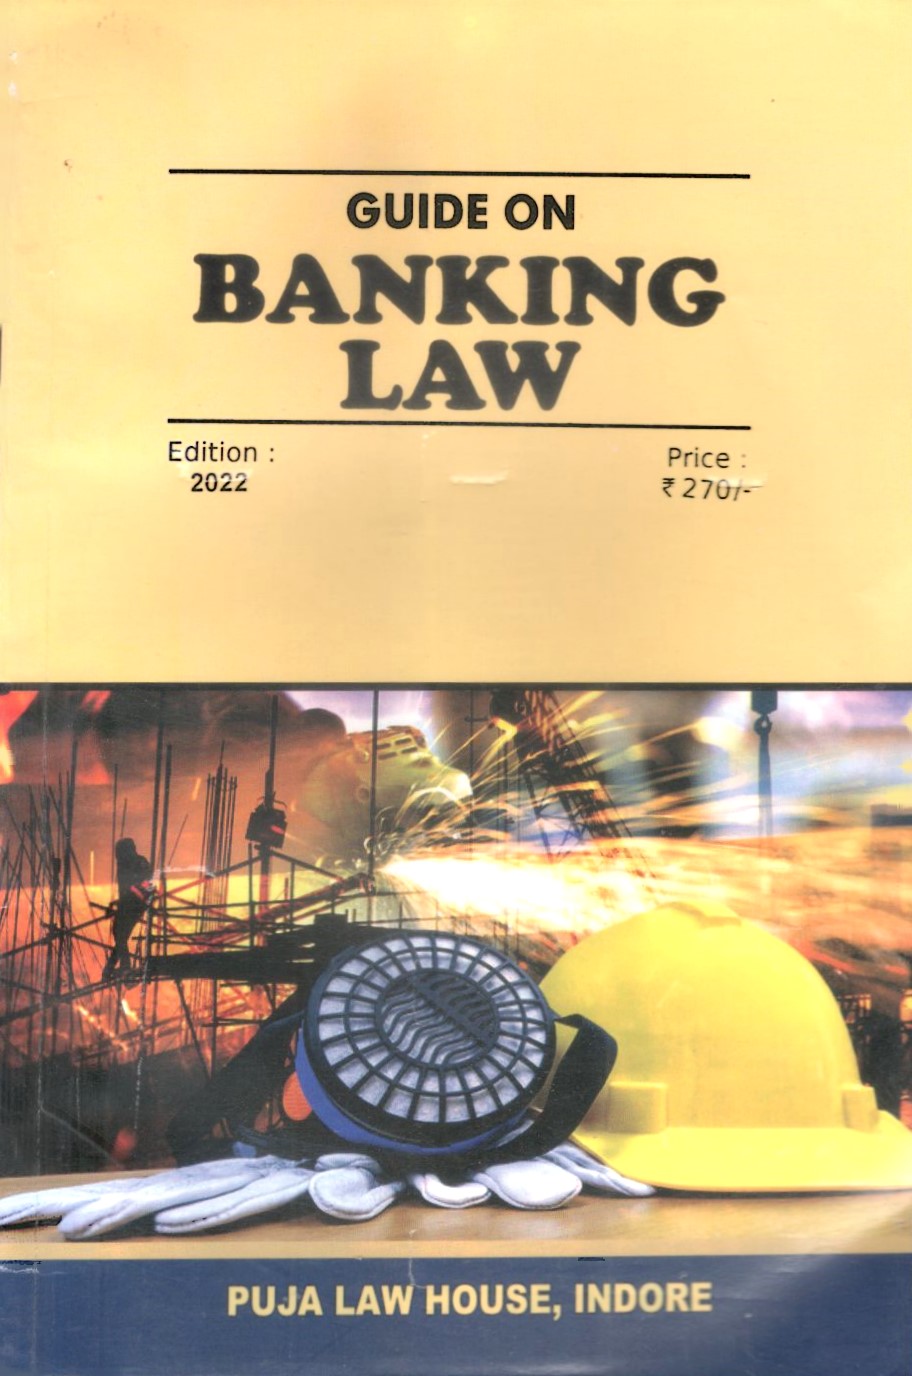  Buy Guide on Banking Law